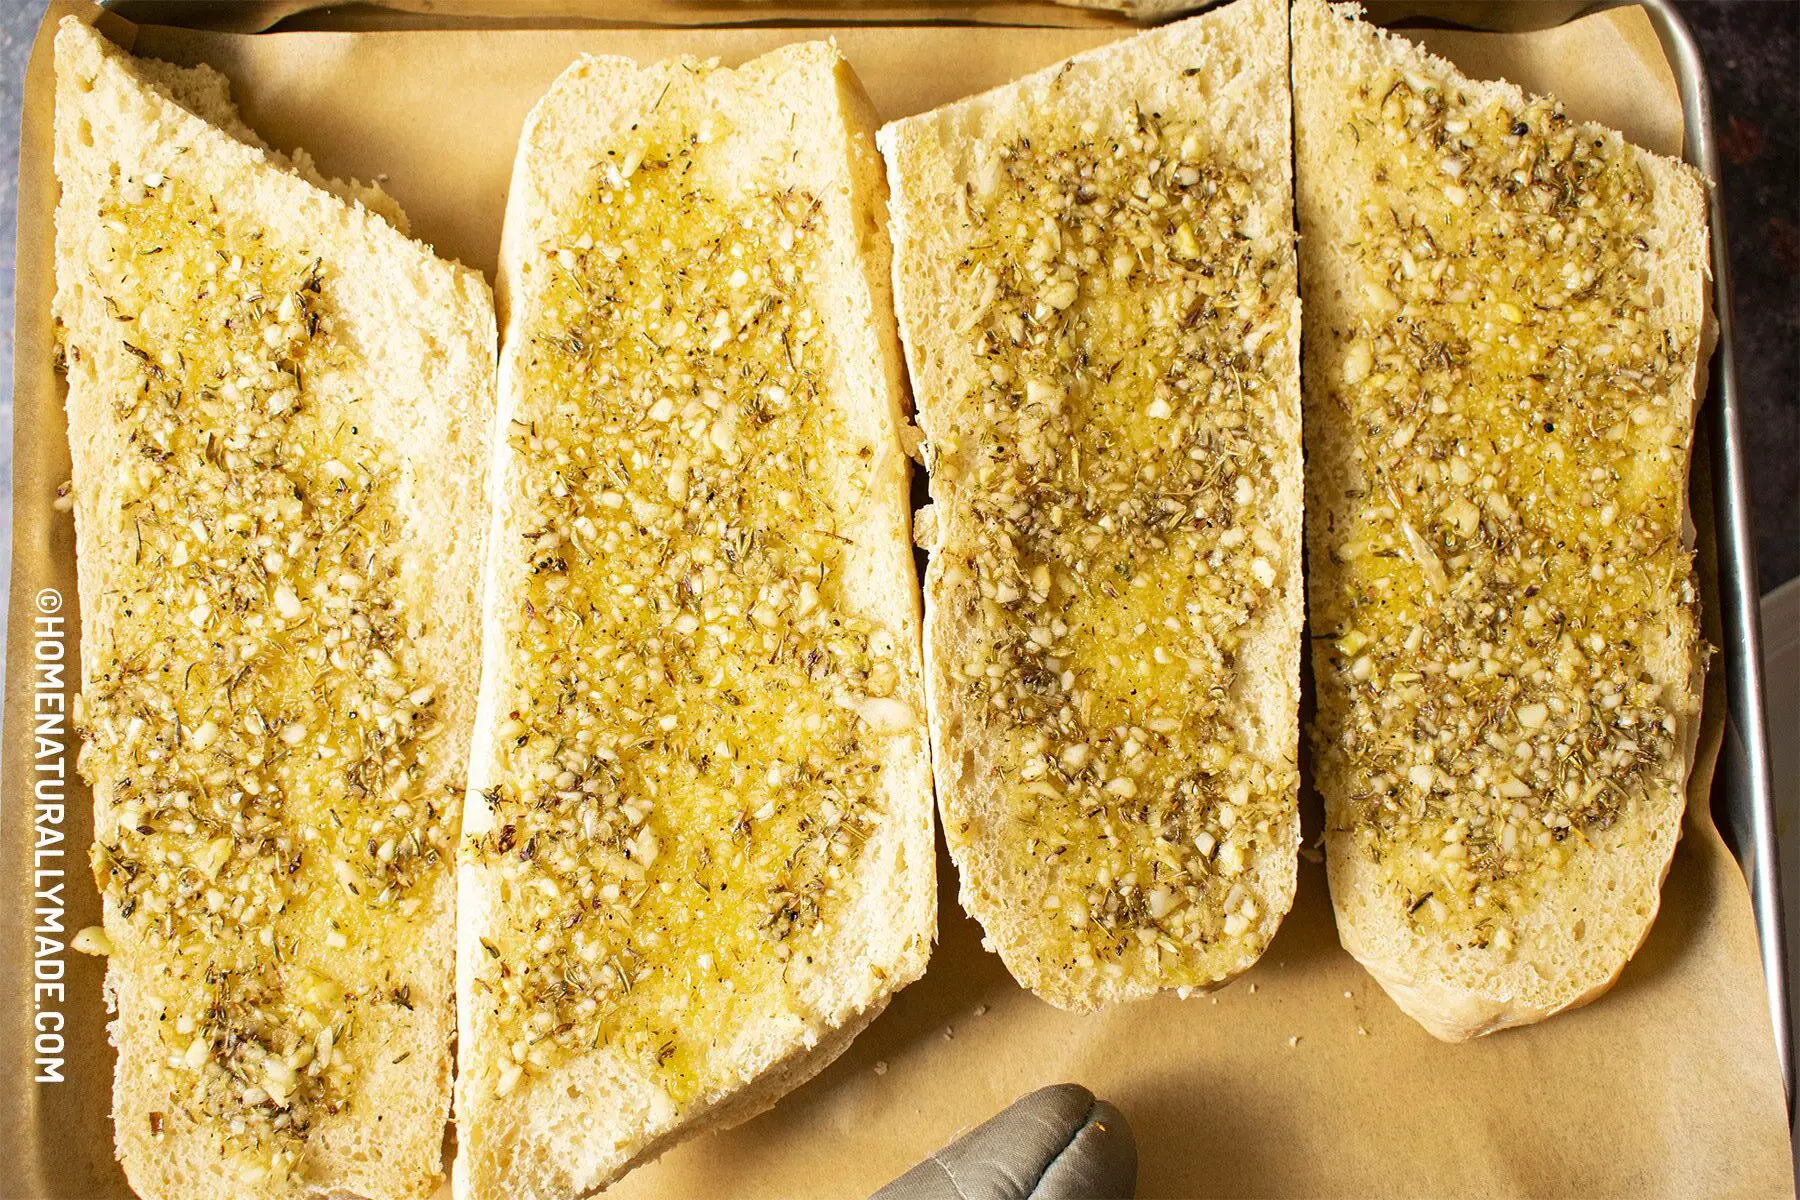 garlic bread before the toasting